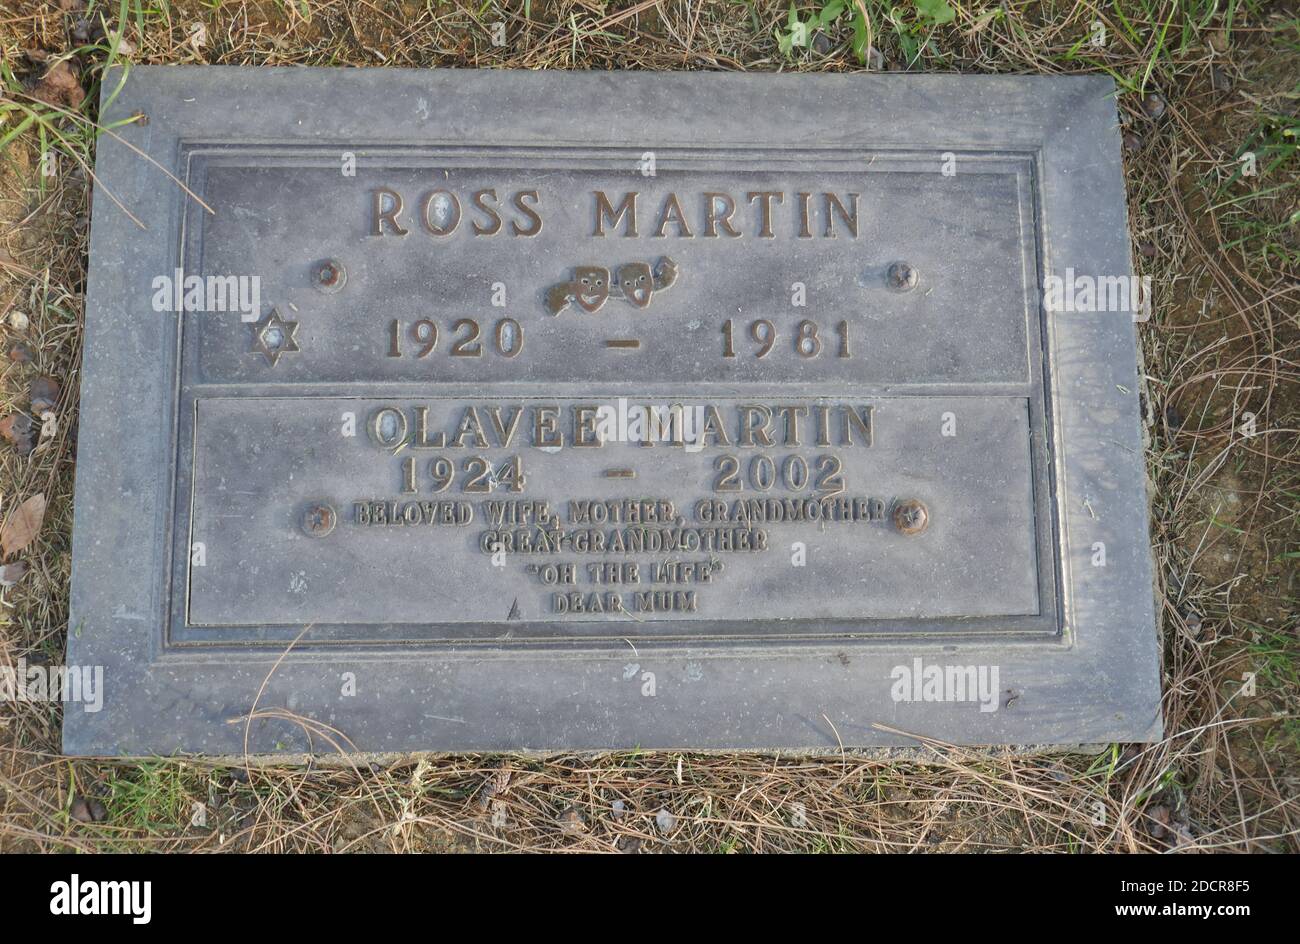 Los Angeles, California, USA 17th November 2020 A general view of atmosphere of actor Ross Martin's Grave at Mount Sinai Cemetery Hollywood Hills on November 17, 2020 in Los Angeles, California, USA. Photo by Barry King/Alamy Stock Photo Stock Photo